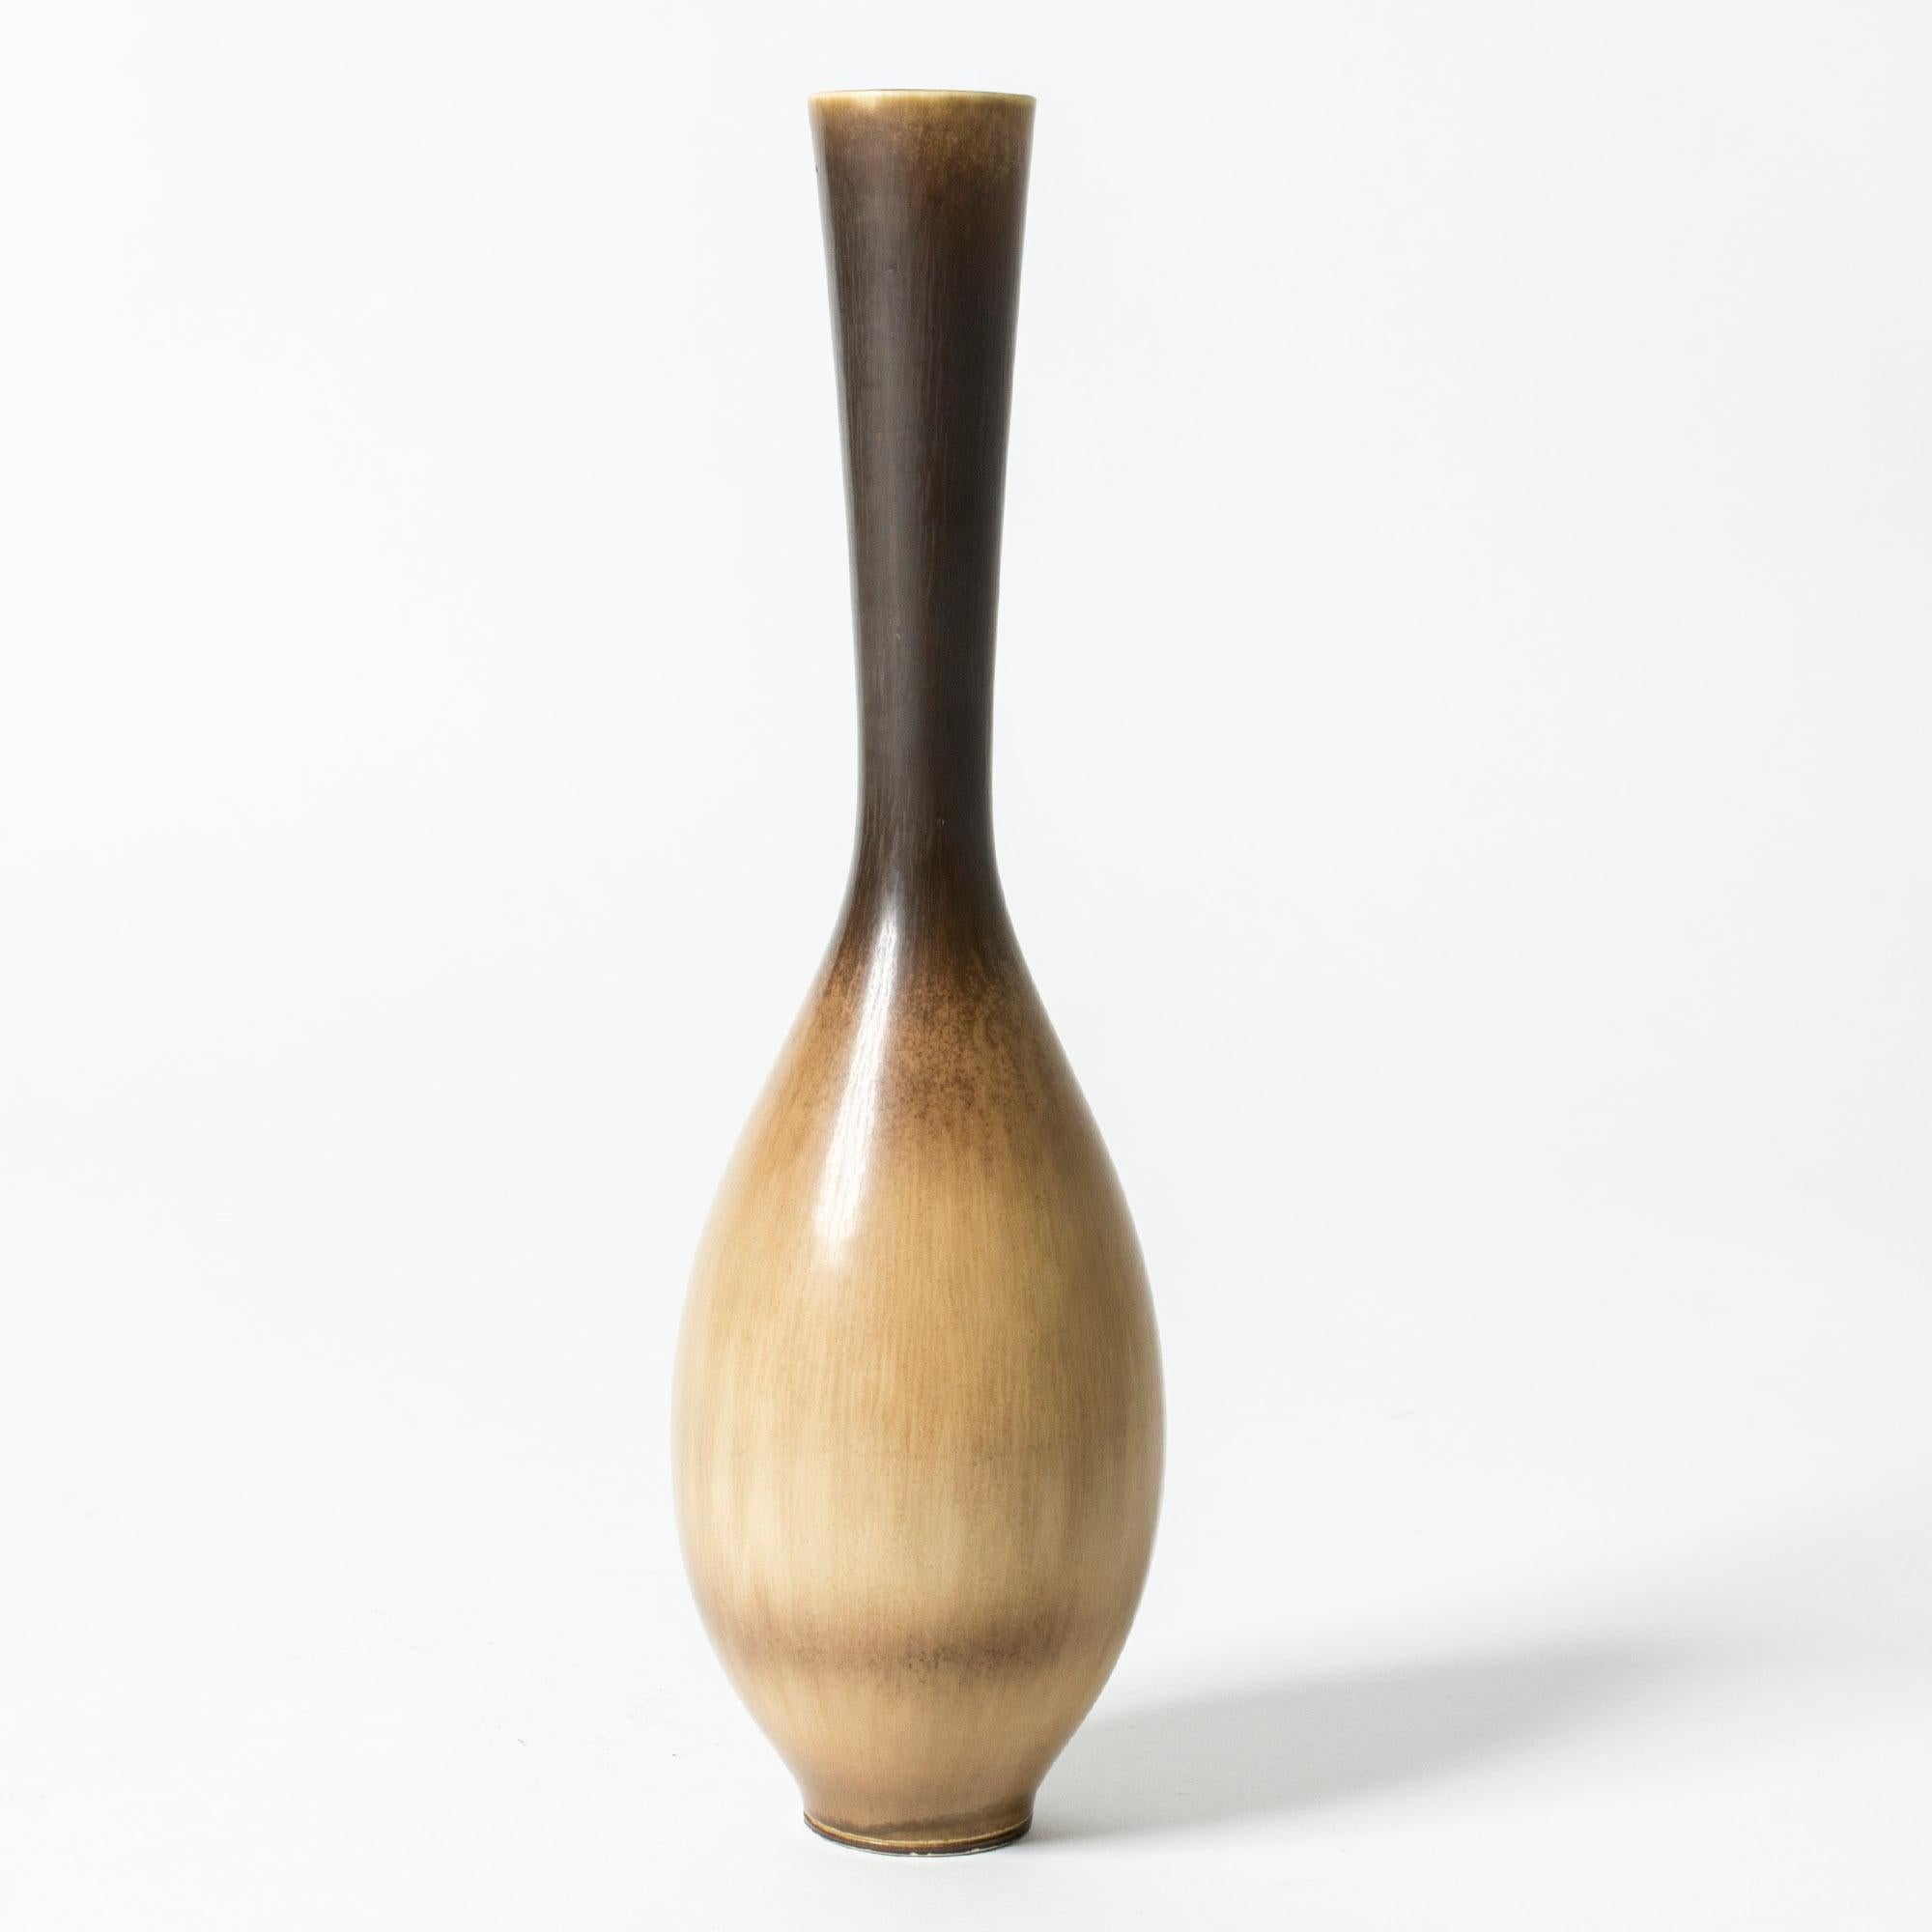 Elegant stoneware vase by Berndt Friberg. Bulbous base and slender neck, beautiful hare’s fur glaze in contrasting dark brown and caramel colors.

Berndt Friberg was a Swedish ceramicist, renowned for his stoneware vases and vessels for